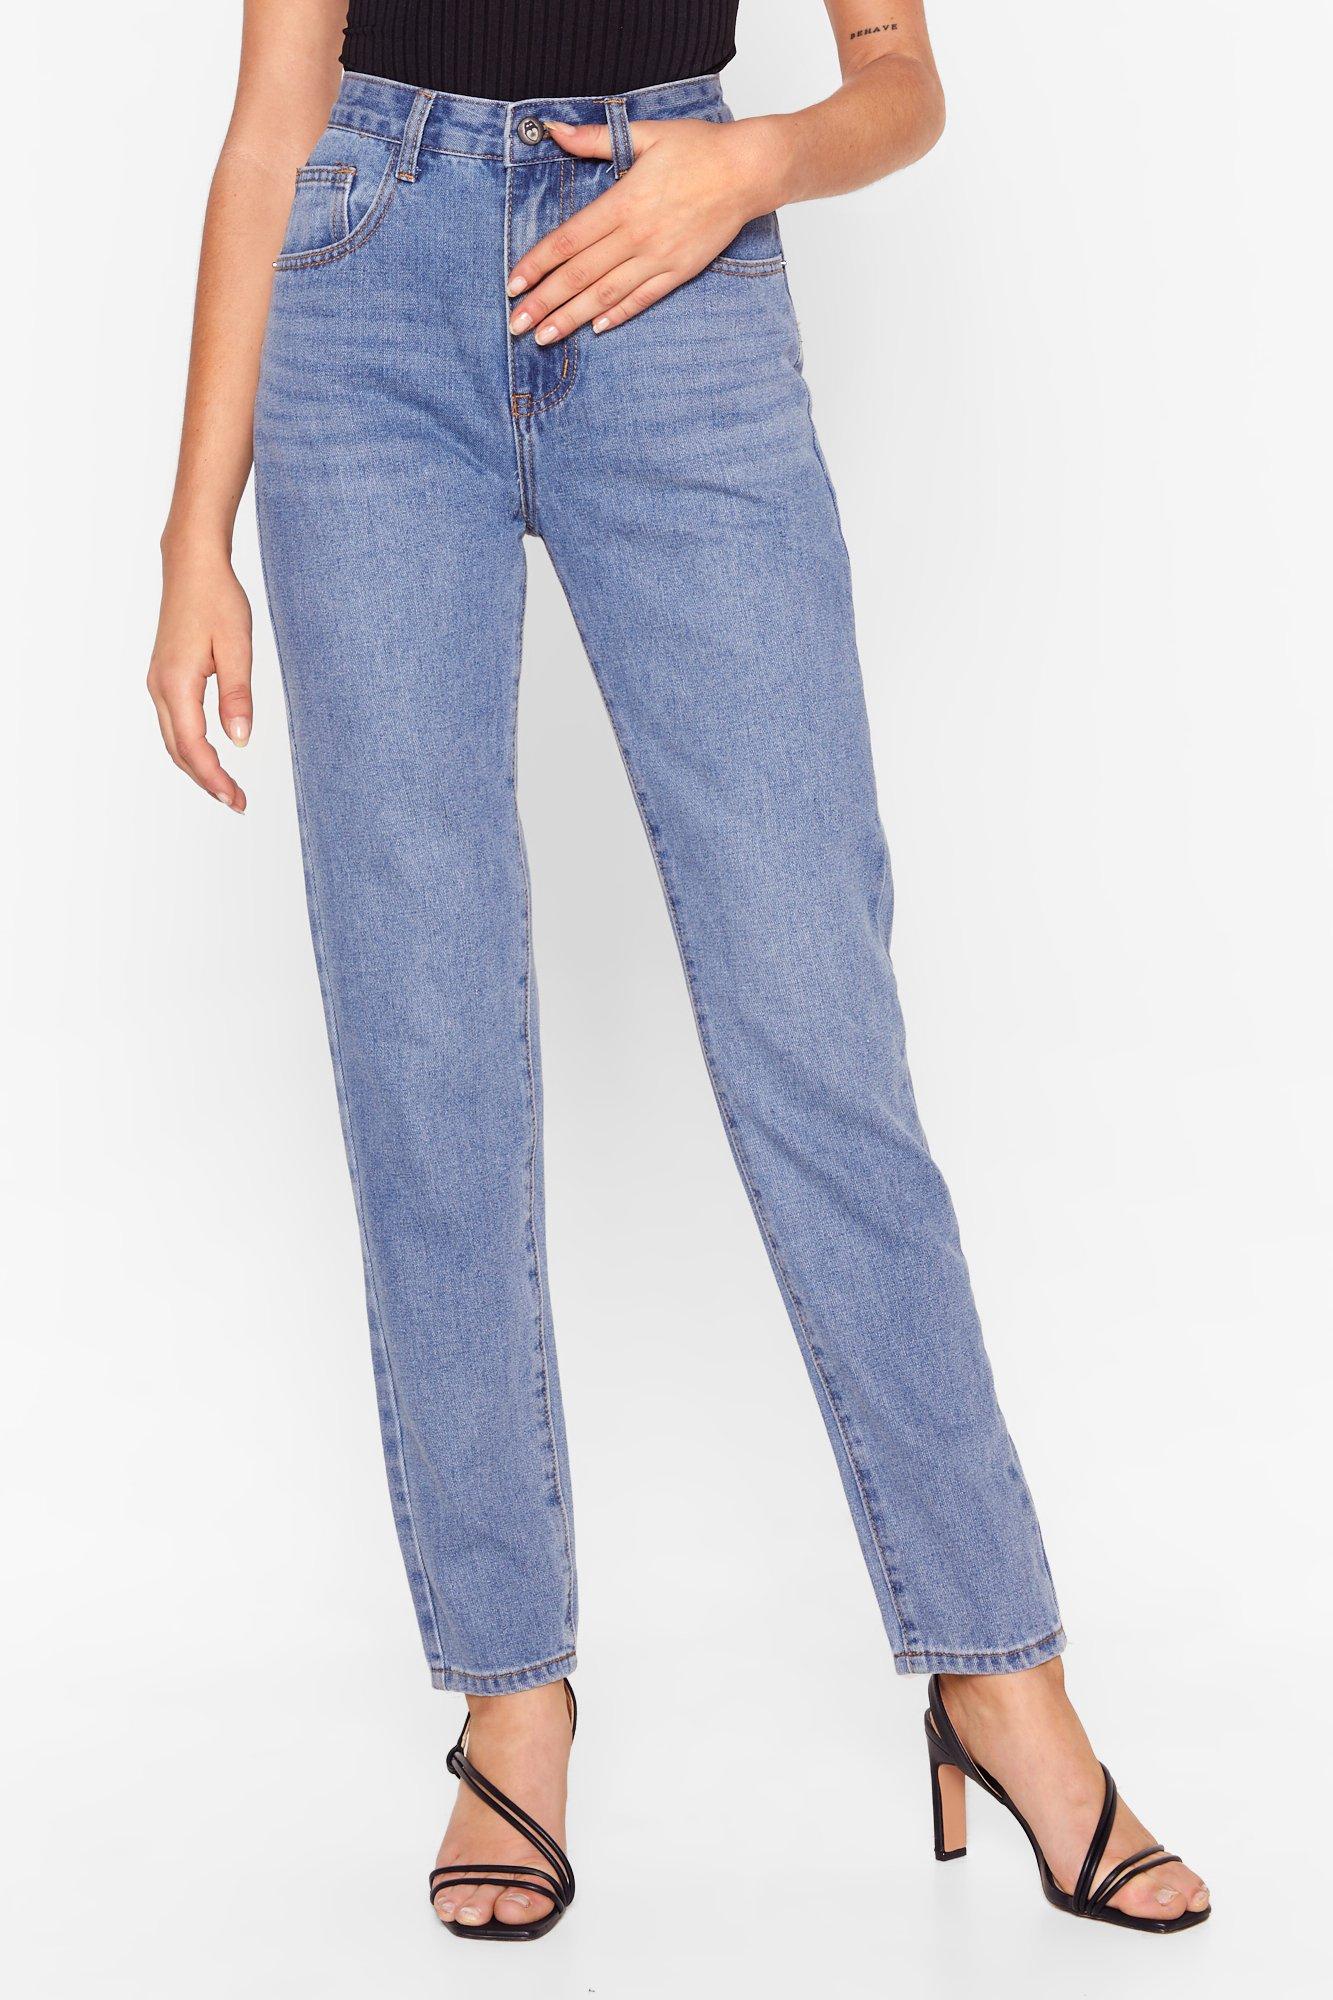 white stag pull on jeans petite